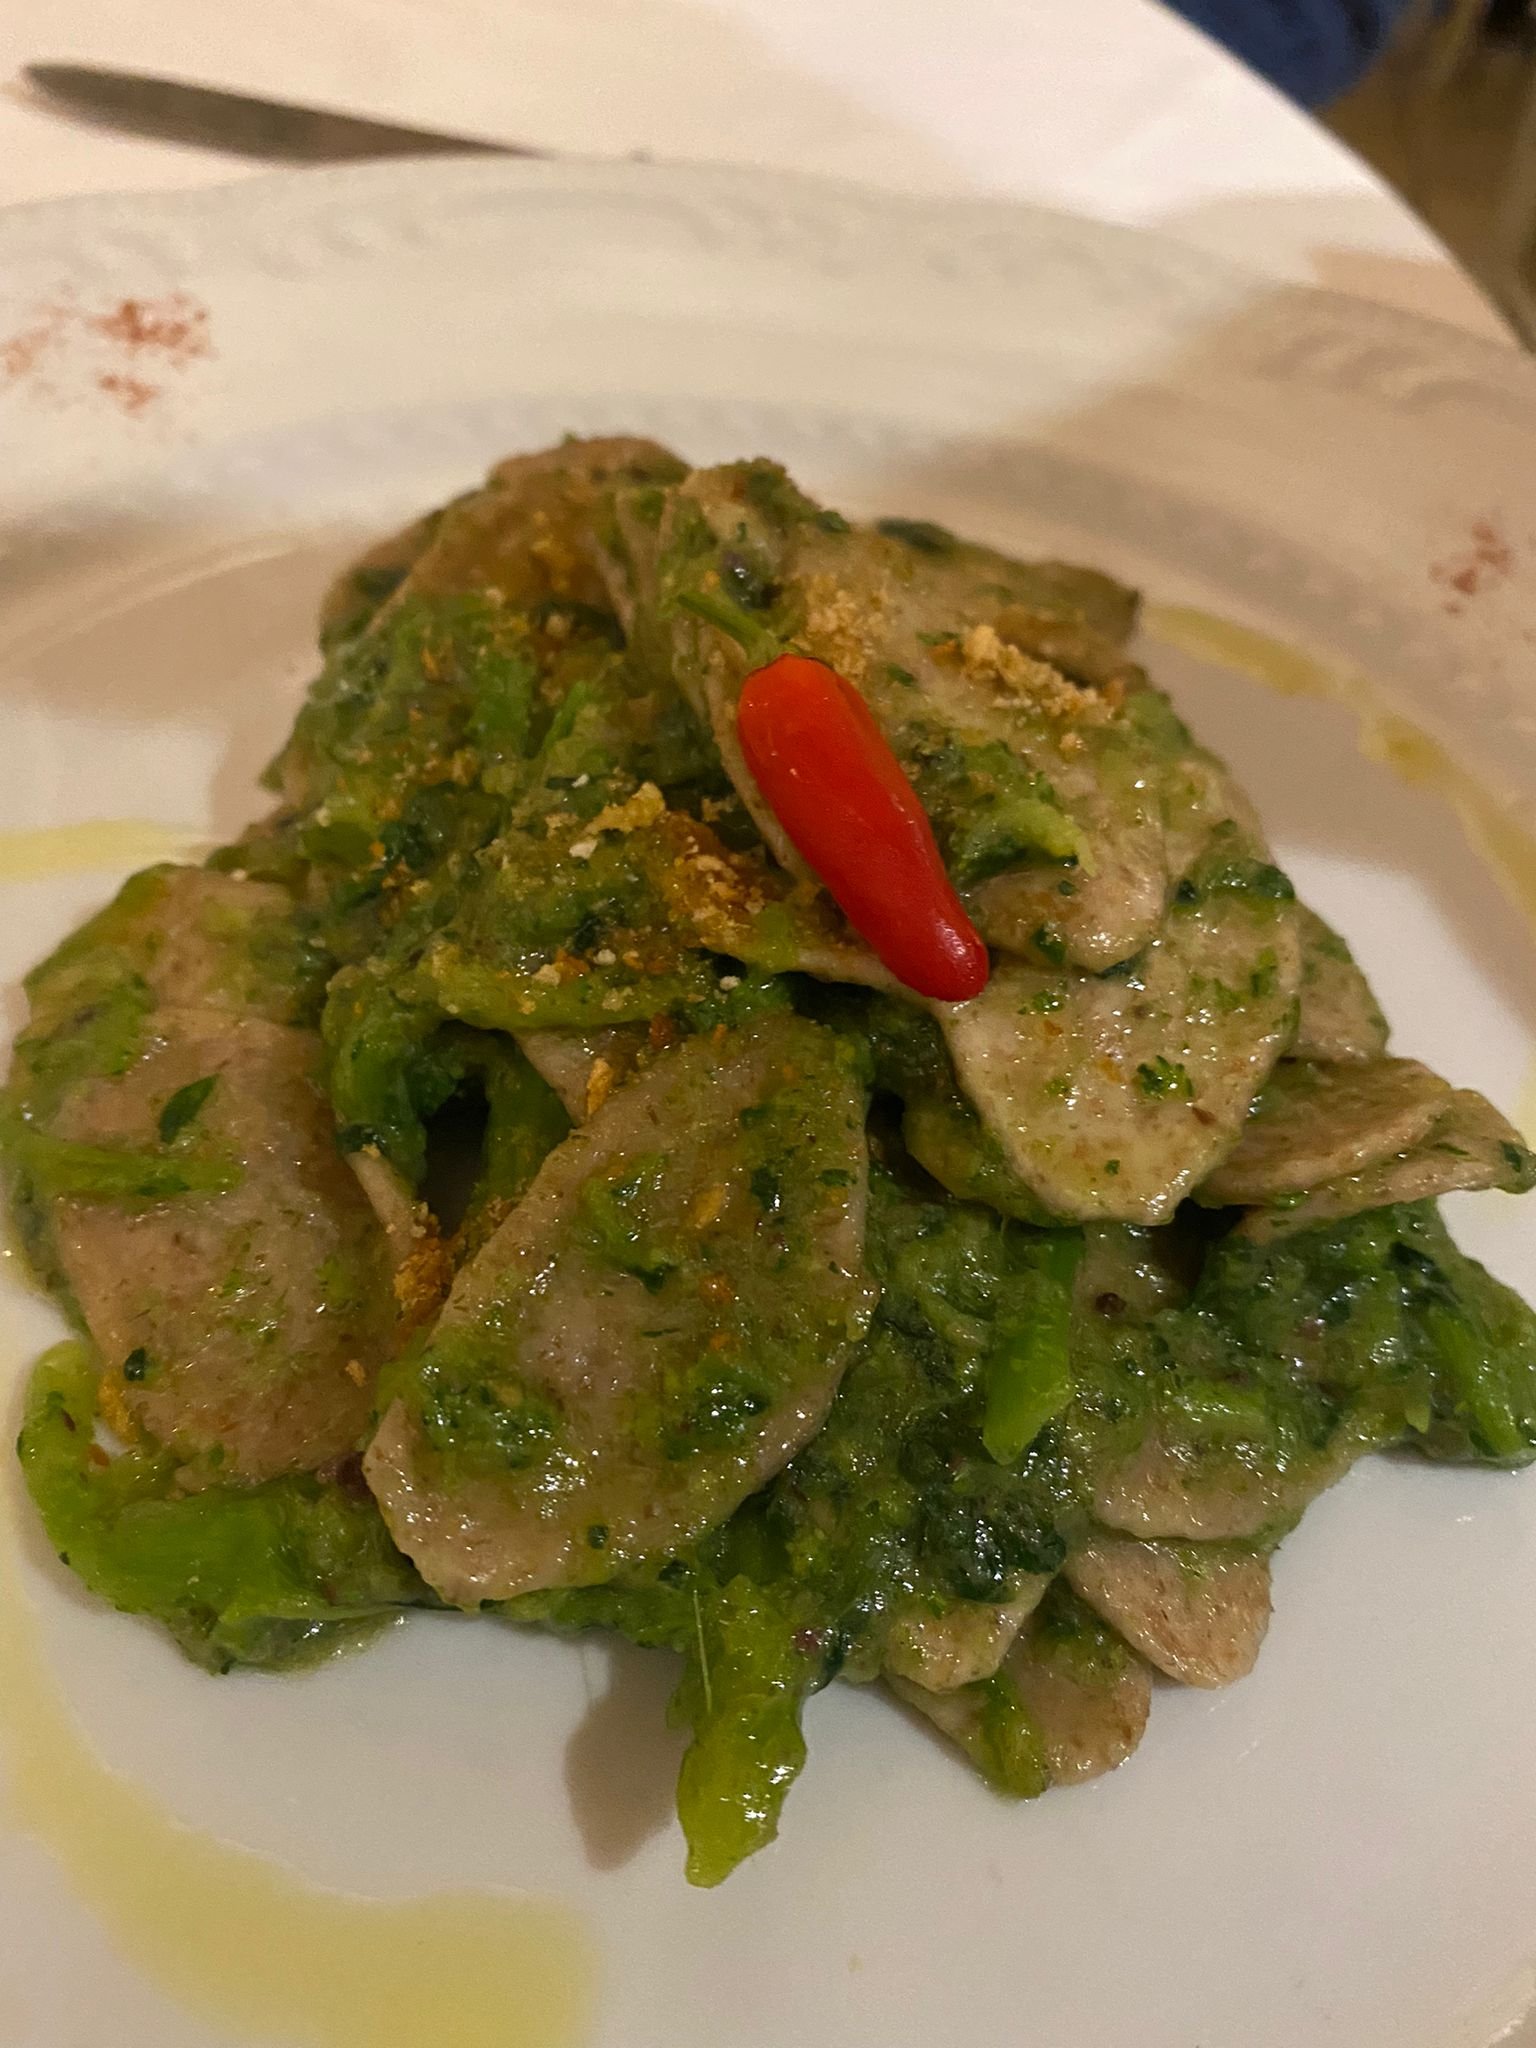 Food and Wine in Sicily - The Thinking Traveller